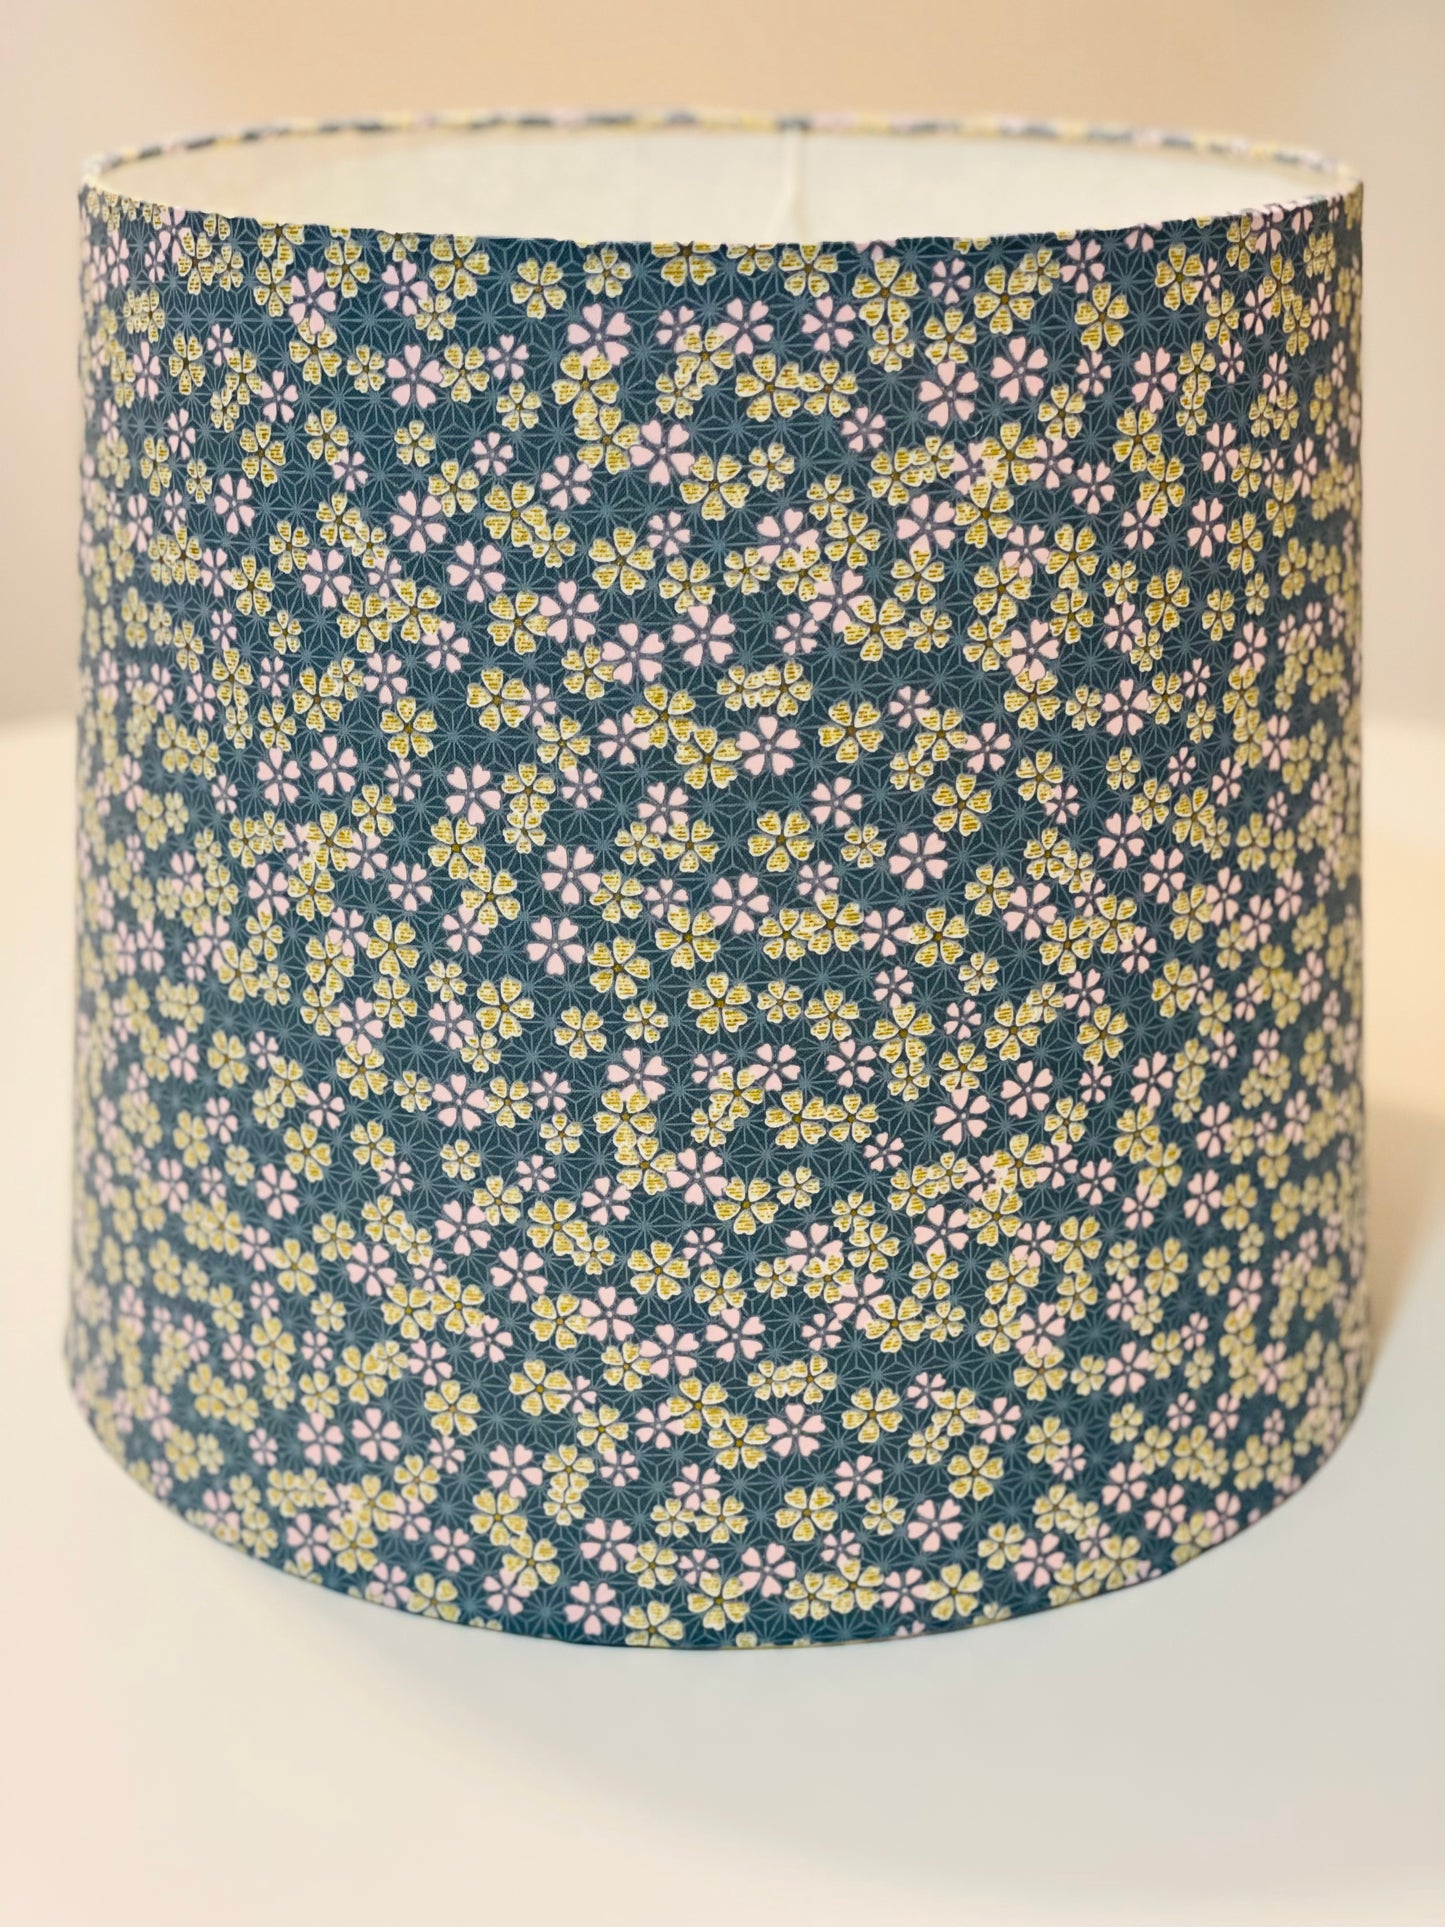 Large Empire Lampshade. 11.75 x 13.75 x 11.75. Japanese Cherry Blossom Motif, Light Teal, Gold, and Pale Pink.